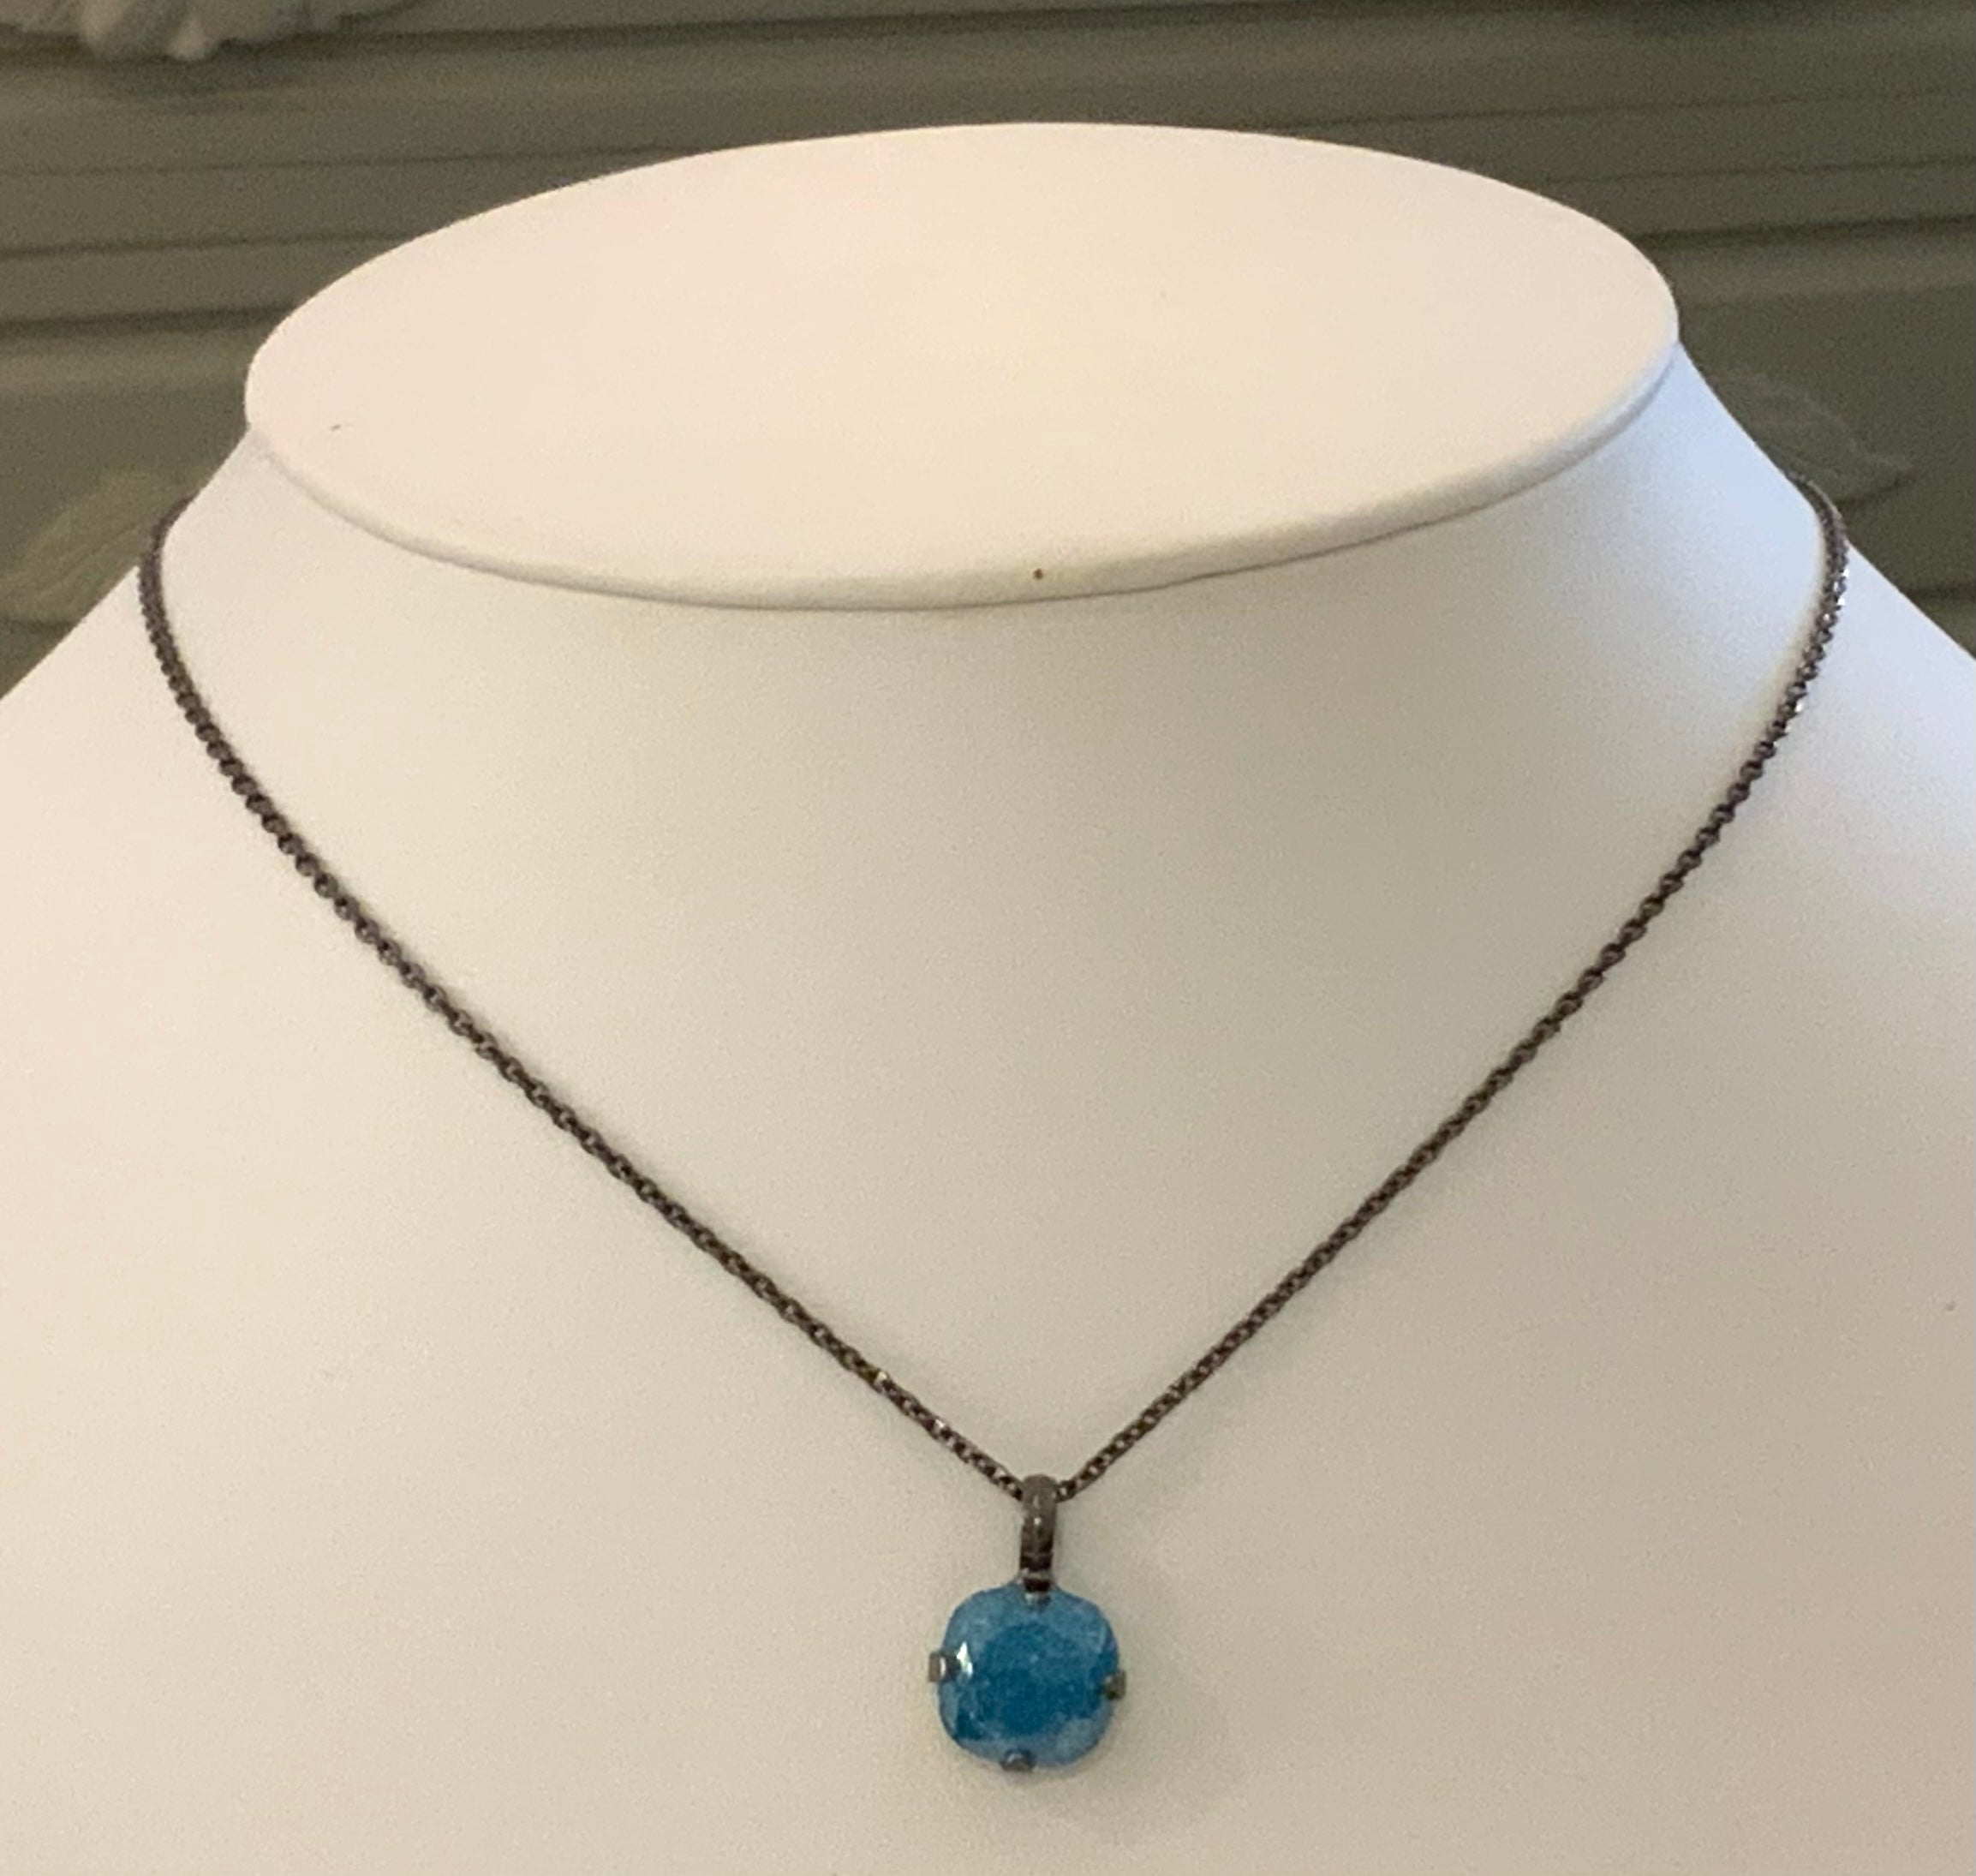 Mariana Gray Plated Cushion Cut Crystal Pendant Necklace in "Light Blue”